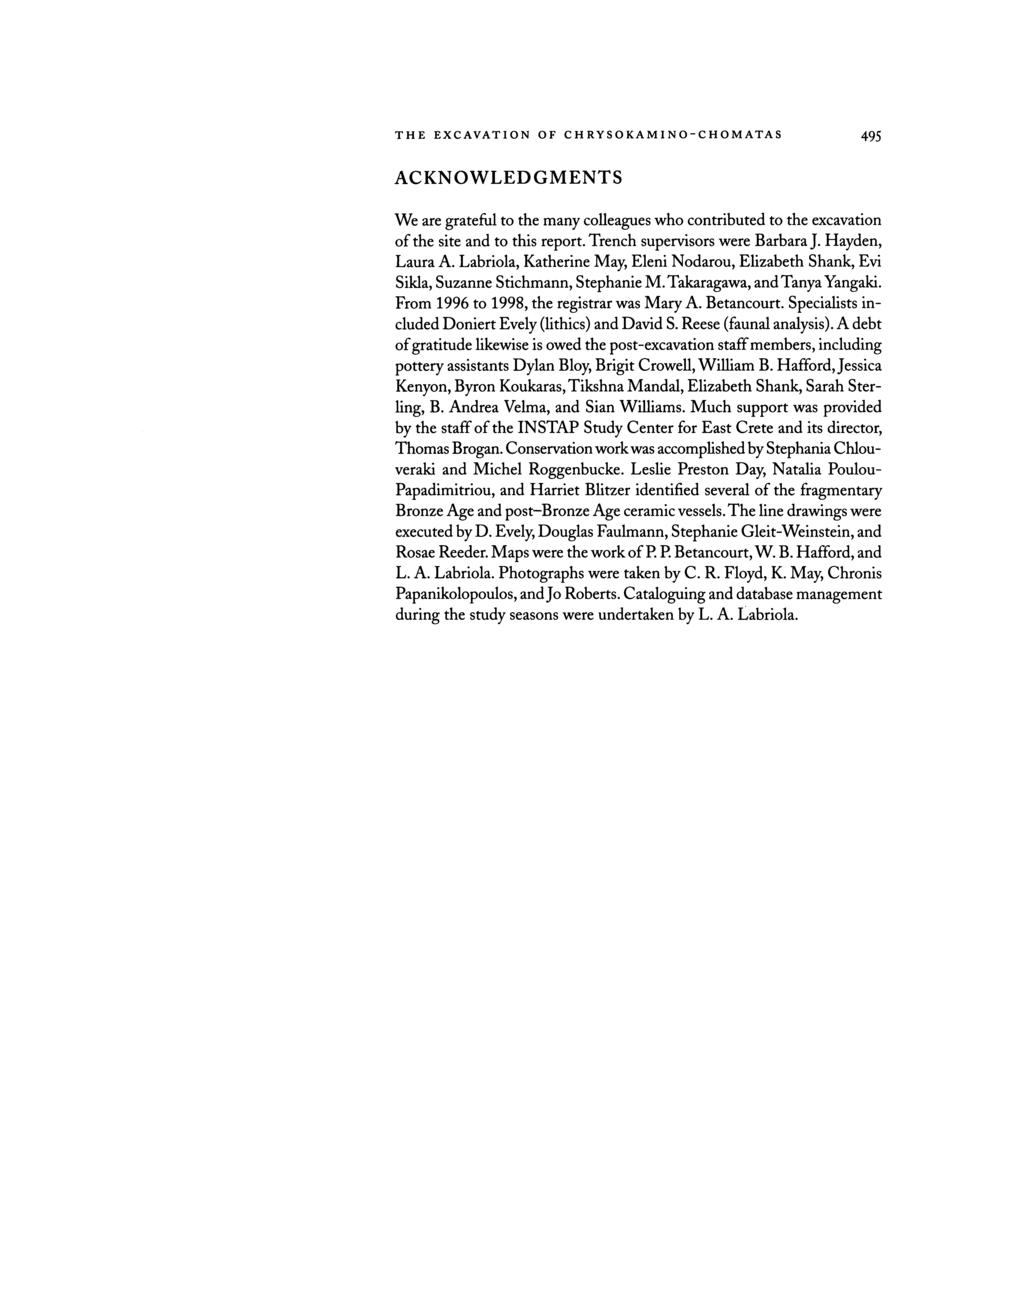 THE EXCAVATION OF C H RYS O KAM I N O - C H OM ATA S 495 ACKNOWLEDGMENTS We are grateful to the many colleagues who contributed to the excavation of the site and to this report.